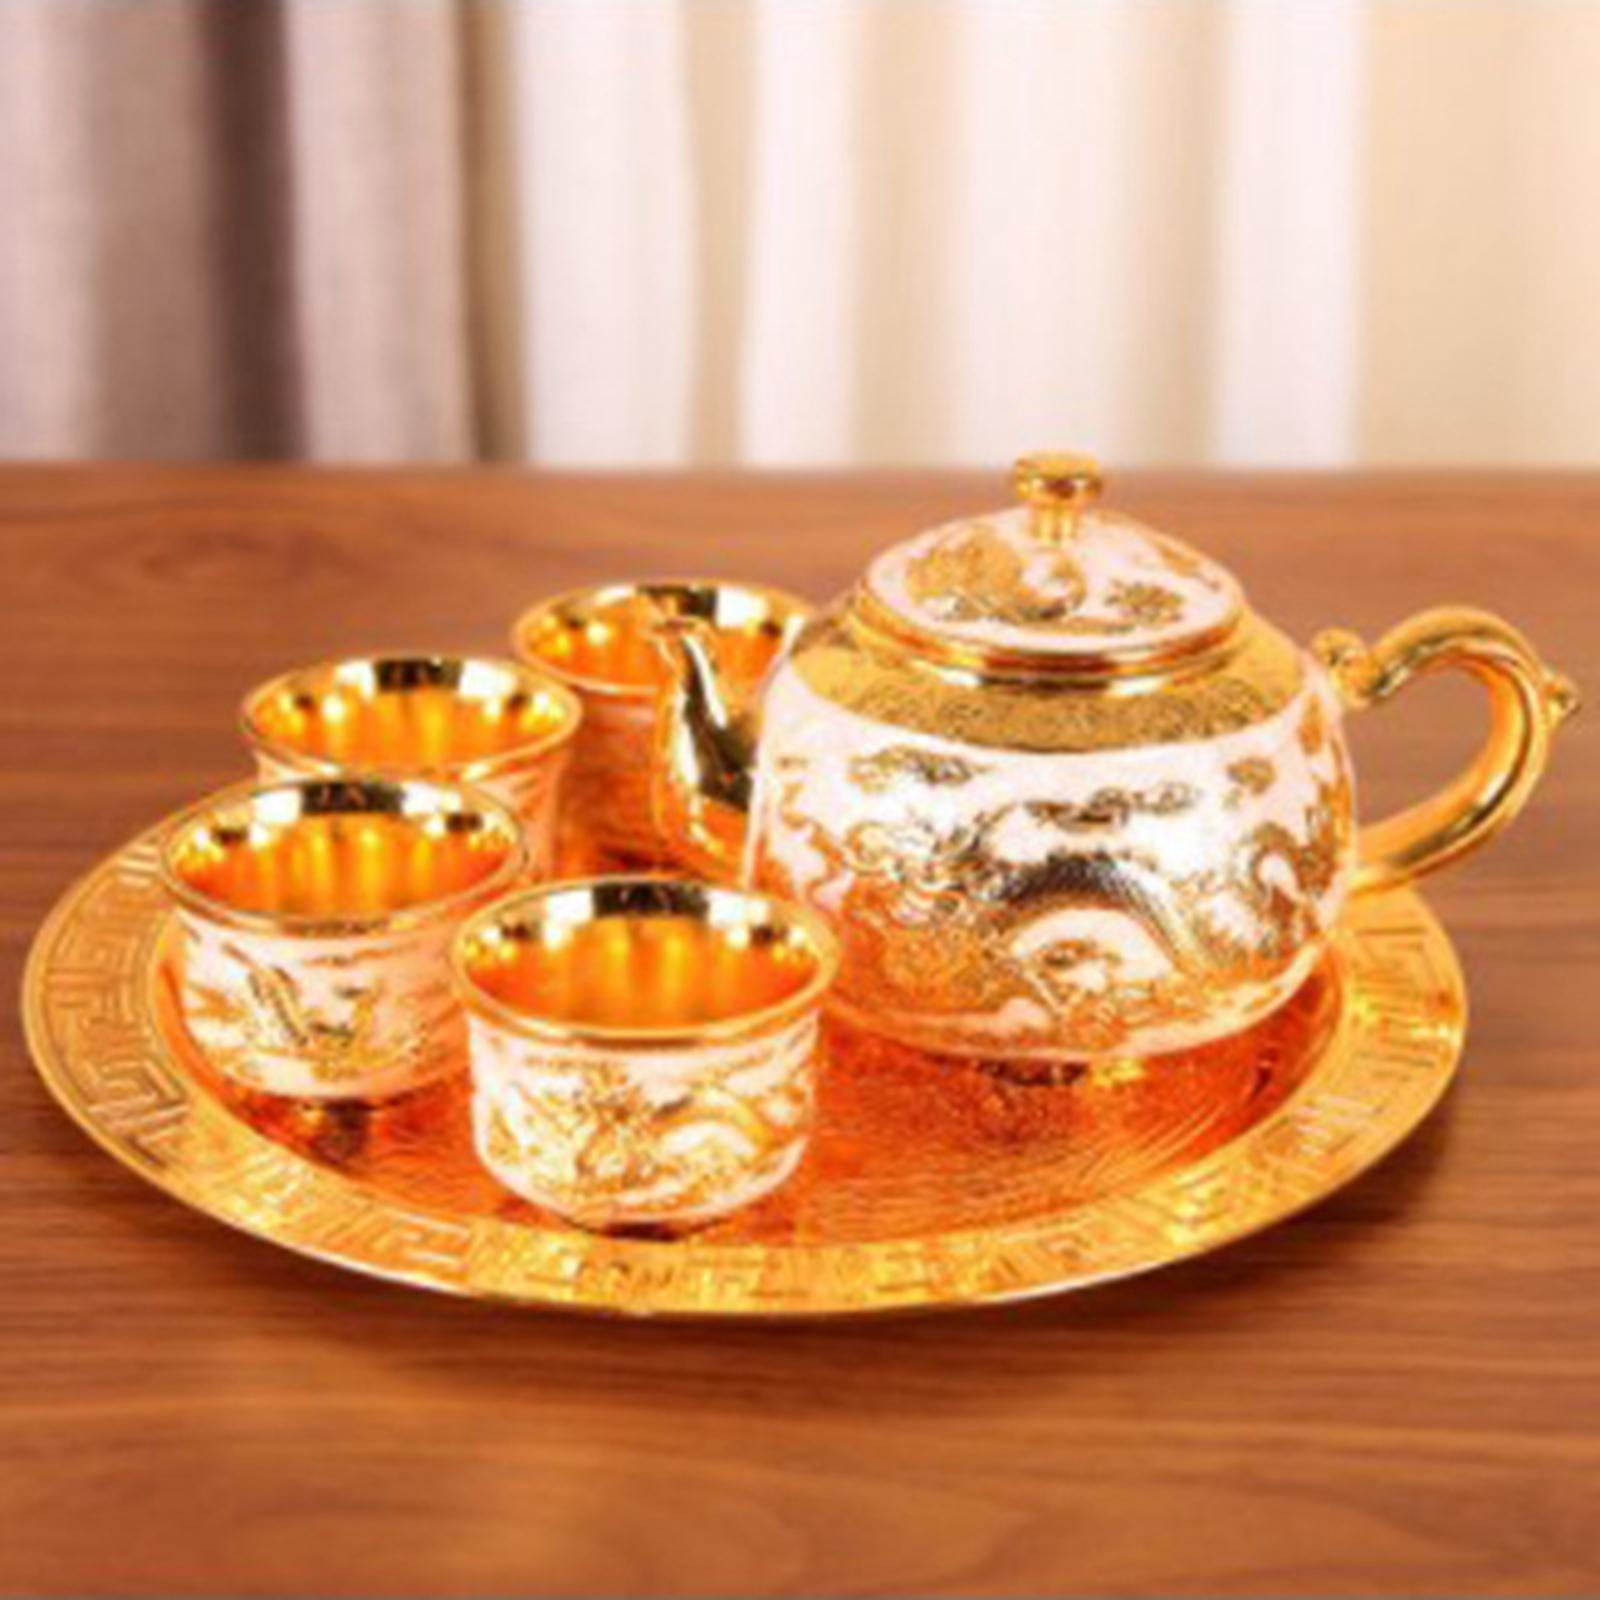 Chinese Tea Gift Set Service Porcelain Tea Pot 4 Cups tray for Adults Men Women Tea Ceremony Wedding Party Home Decor 